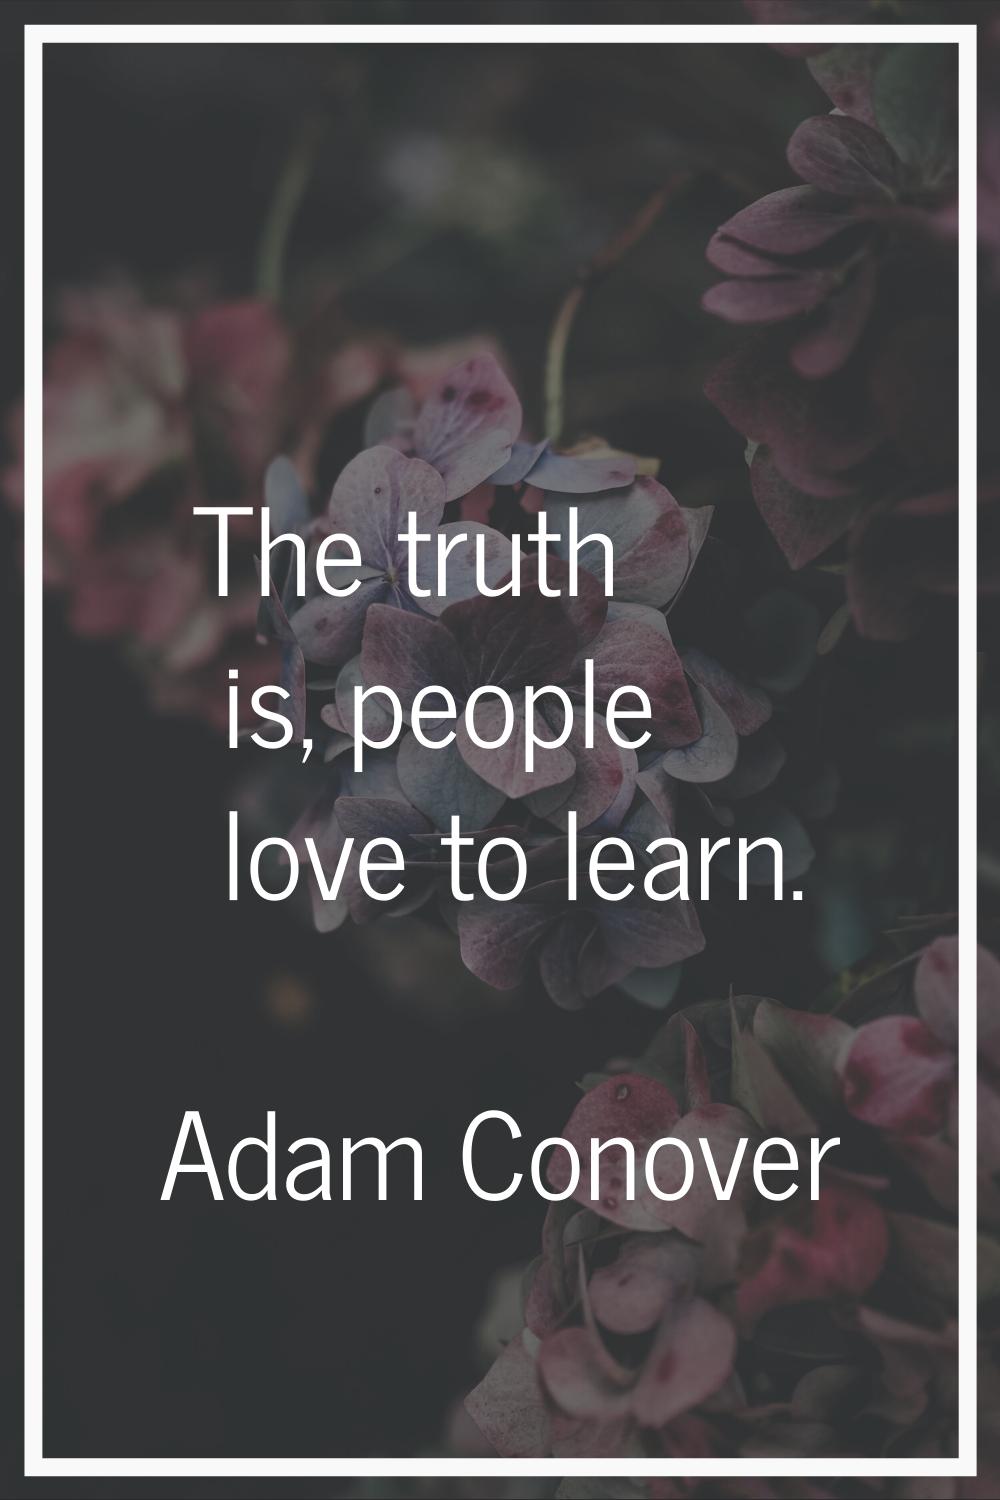 The truth is, people love to learn.